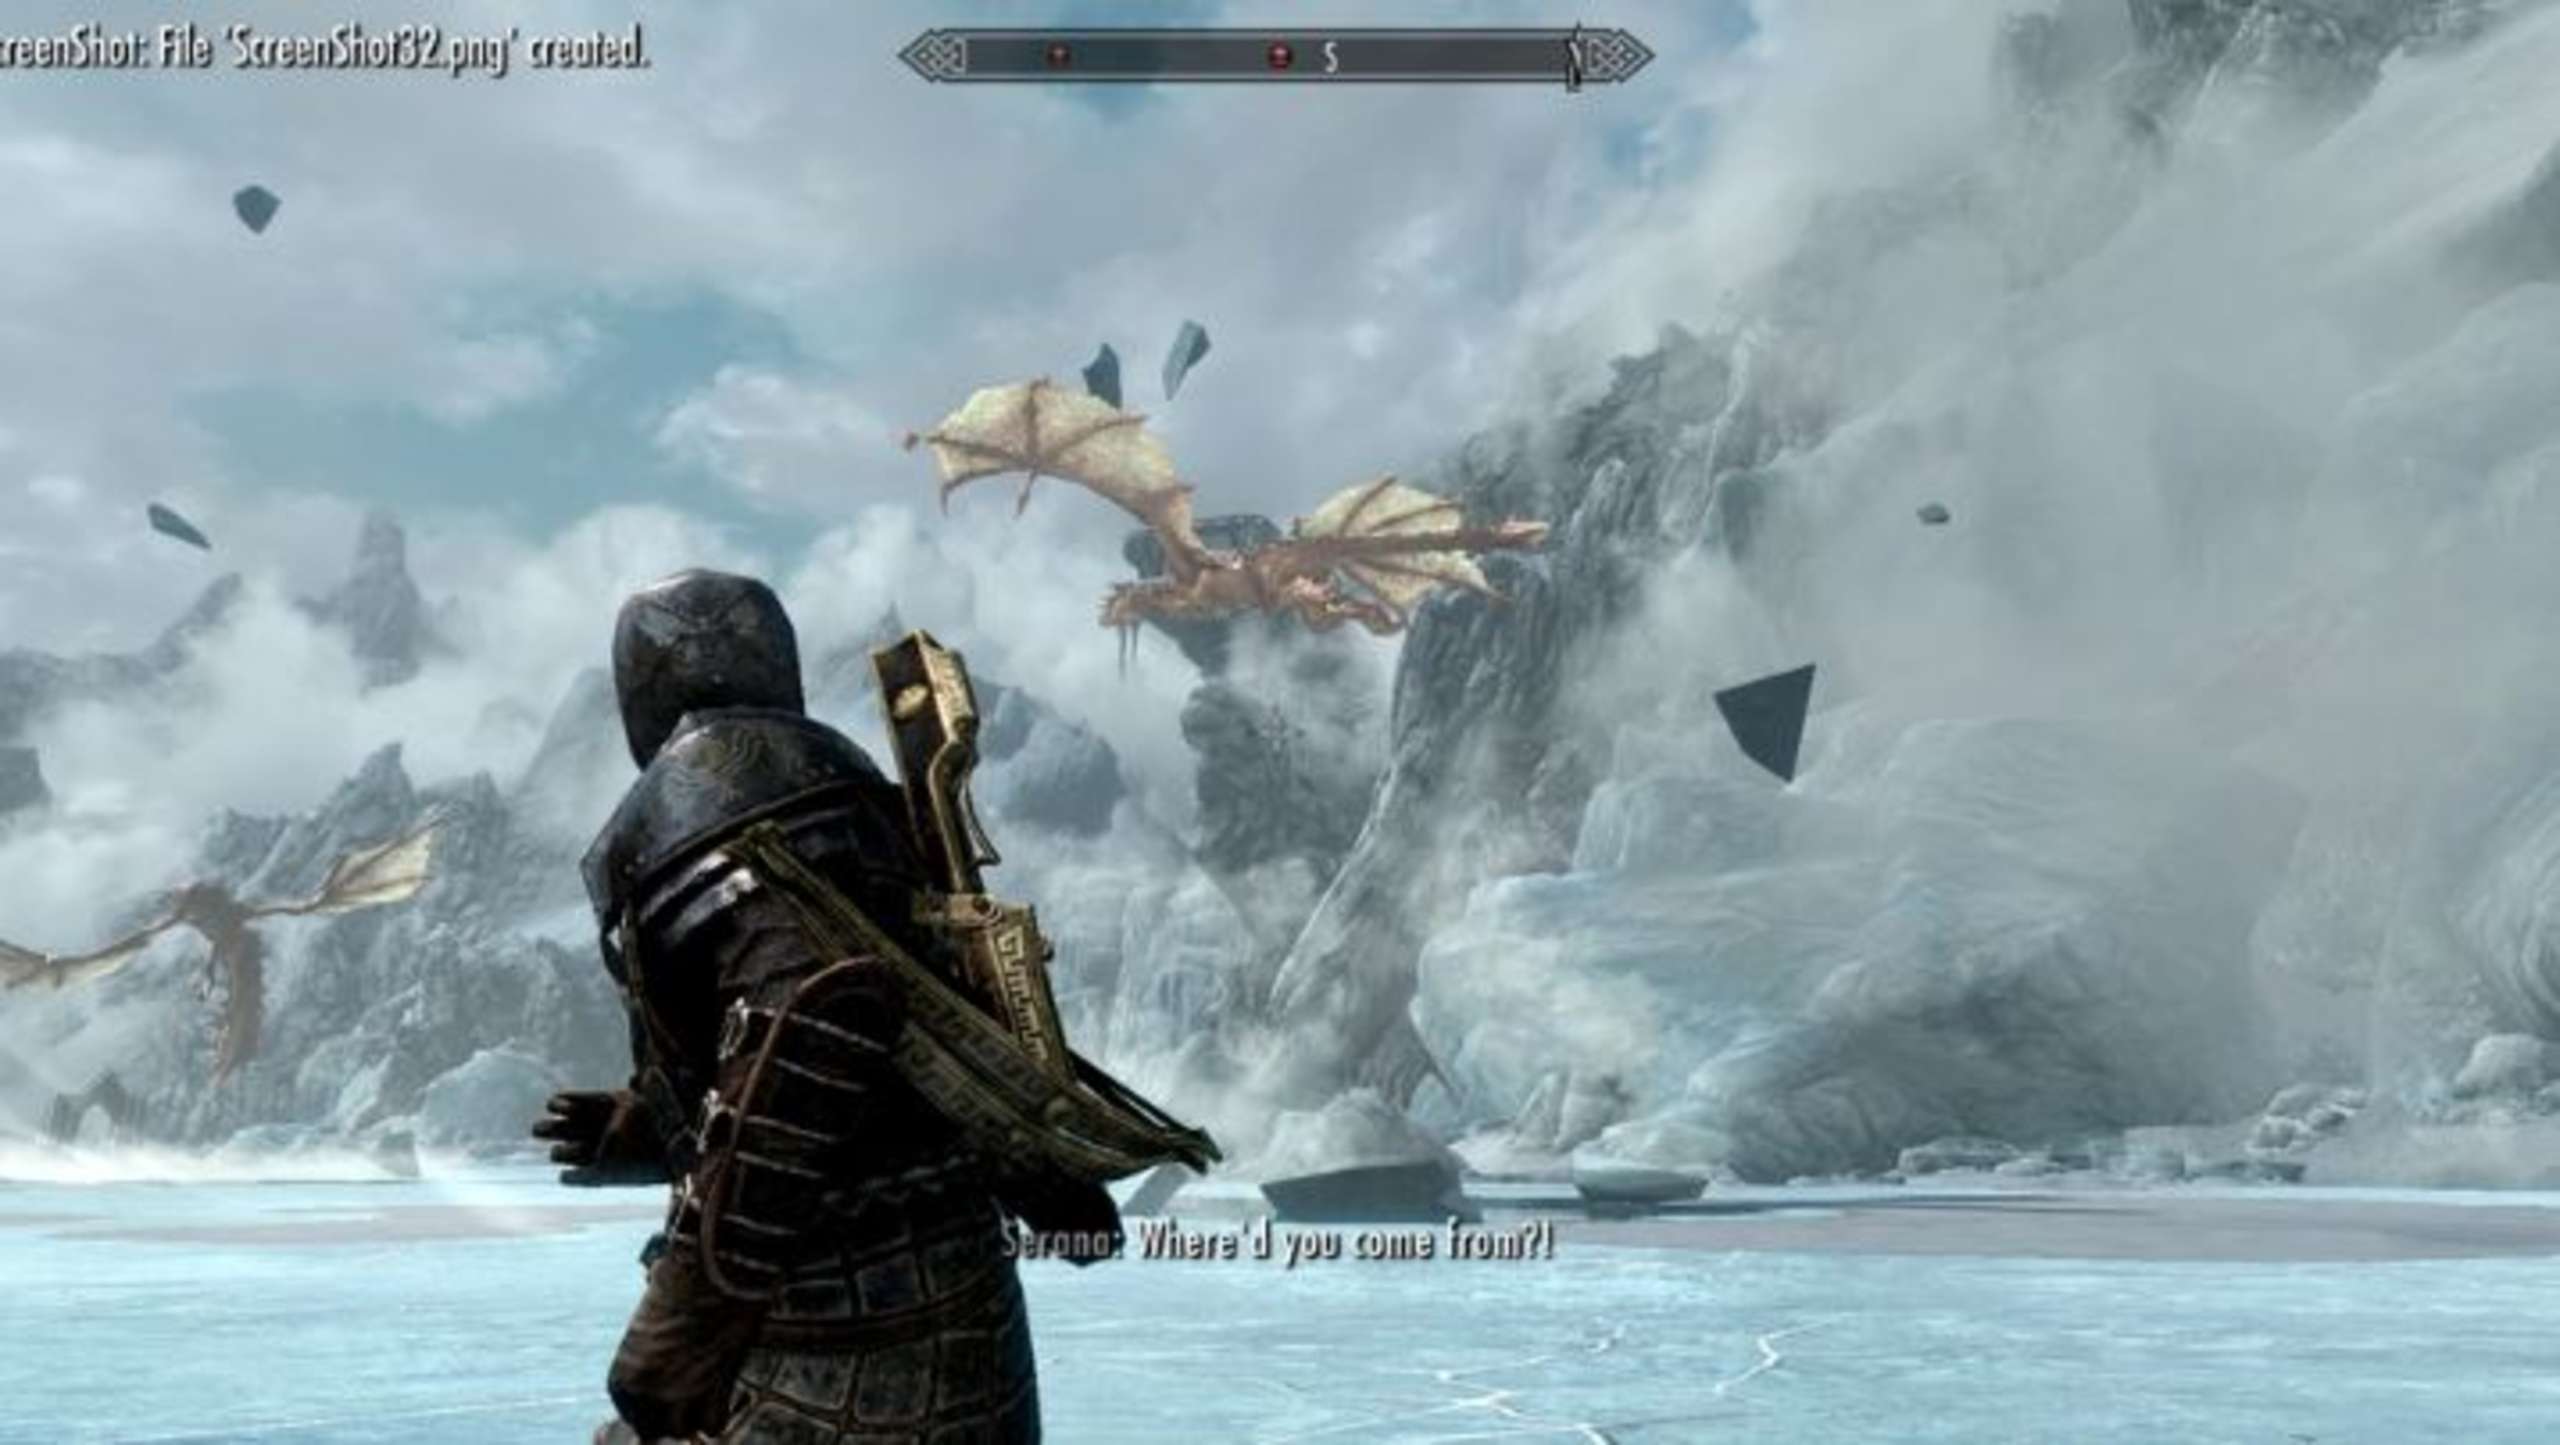 Dragons In The Elder Scrolls 5: Skyrim Are Impressive, But The Game’s Infamous Bugs Are Just As Memorable